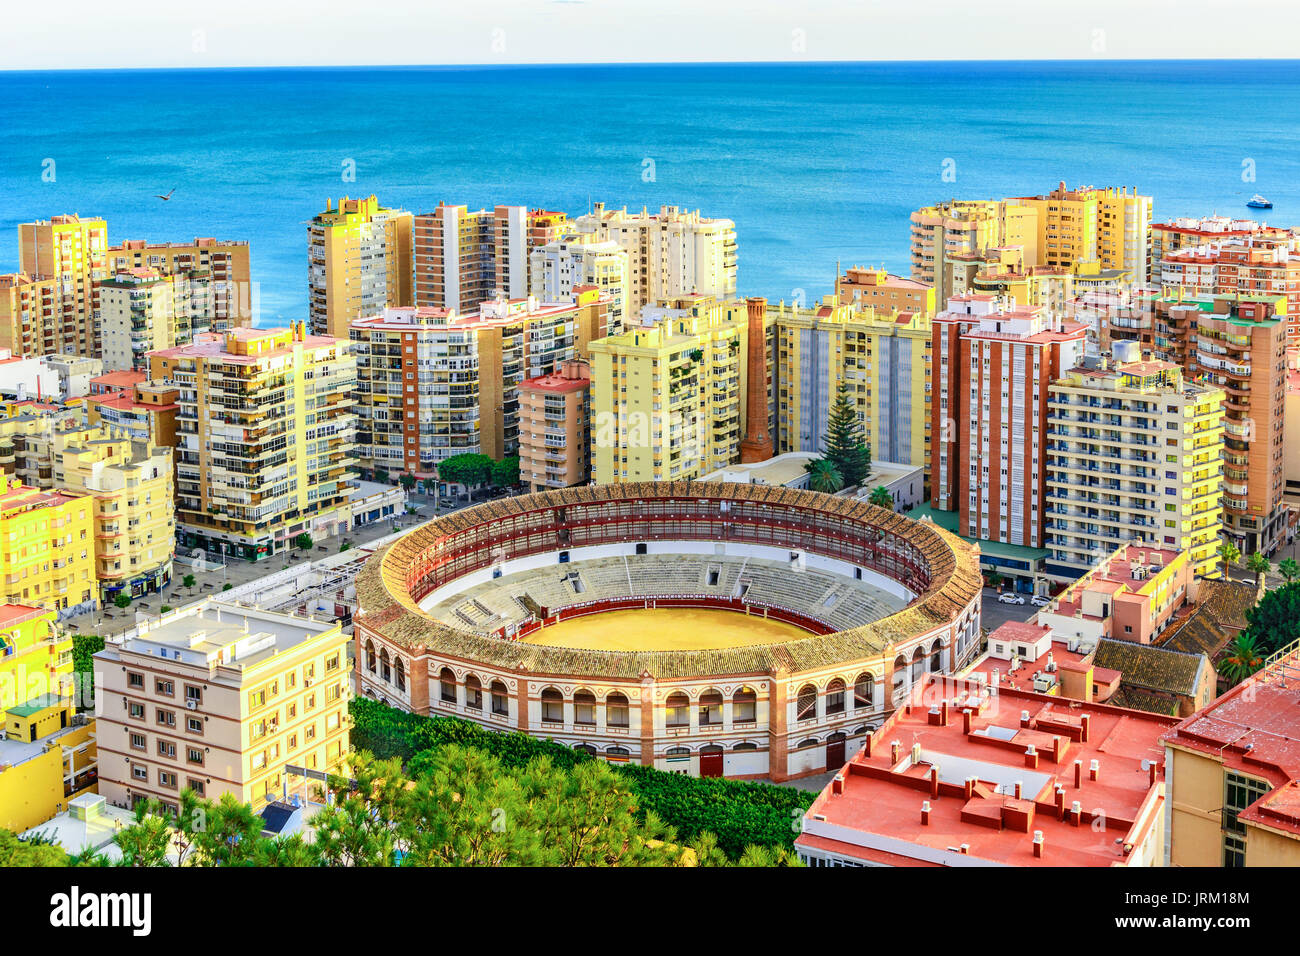 Overview of Malaga arena, Spain with the Plaza de Toros (bullring) in the foreground, Malaga,Andalusia,Costa del sol, Spain, Europe Stock Photo